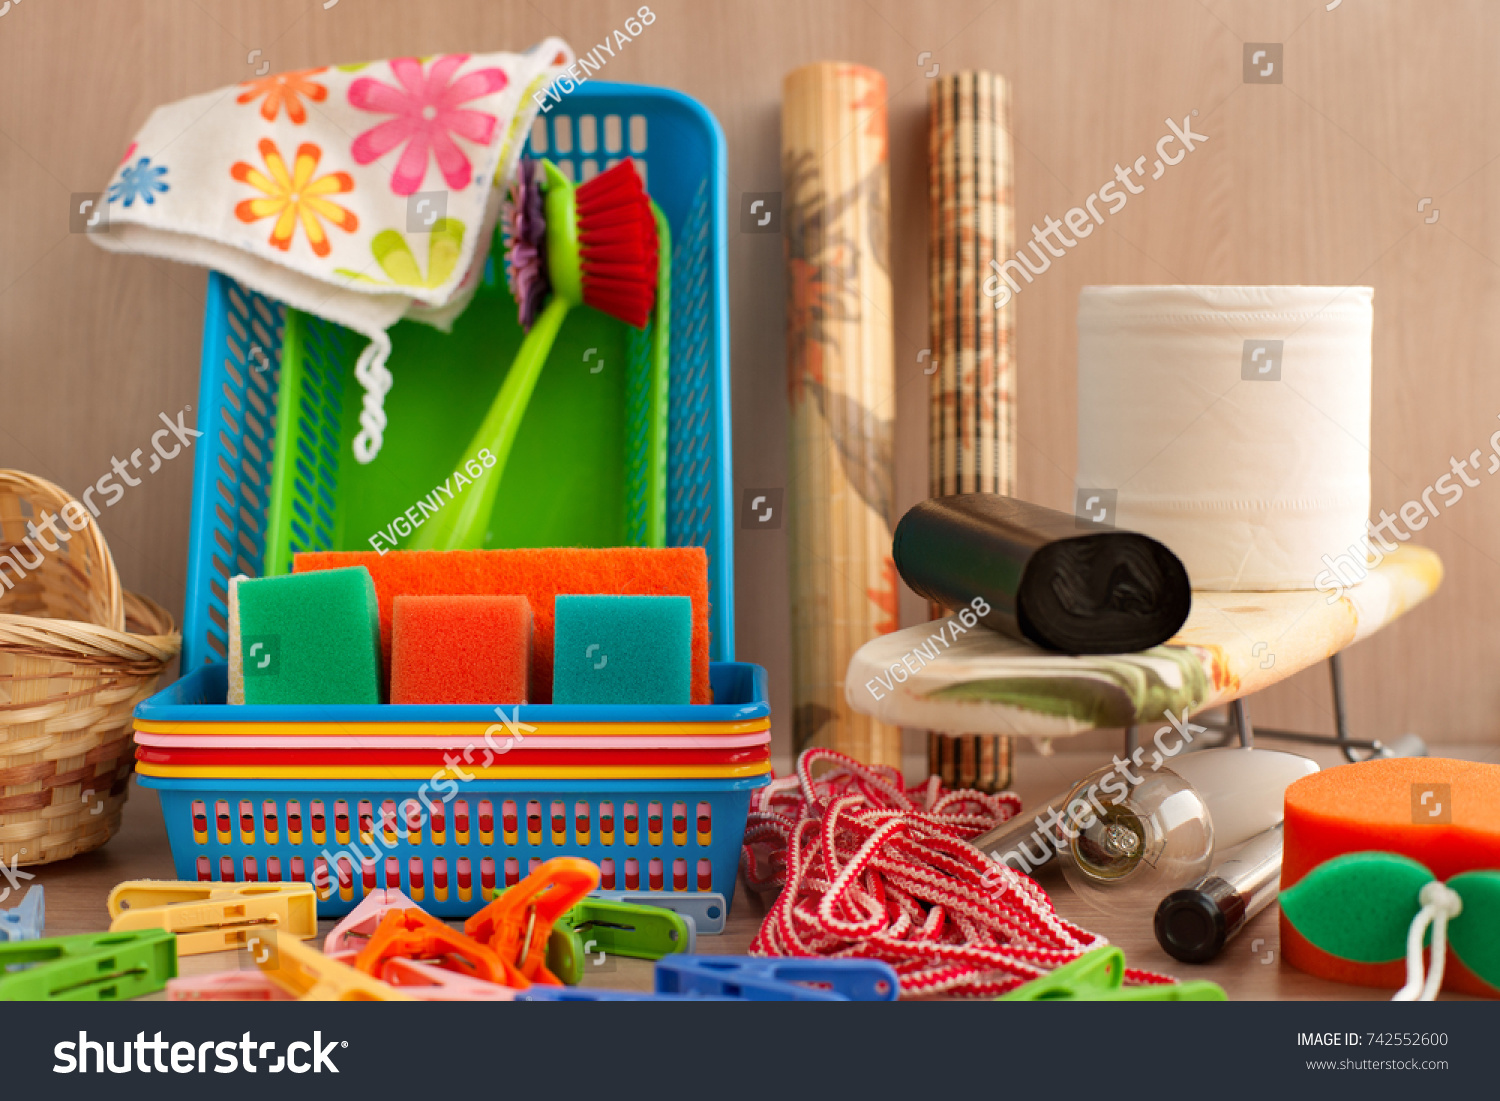 Many household goods. Ironing board, plastic boxes, toilet paper, garbage bags, parallon sponges, clothespins are household utensils. Household items for everyday life. #742552600